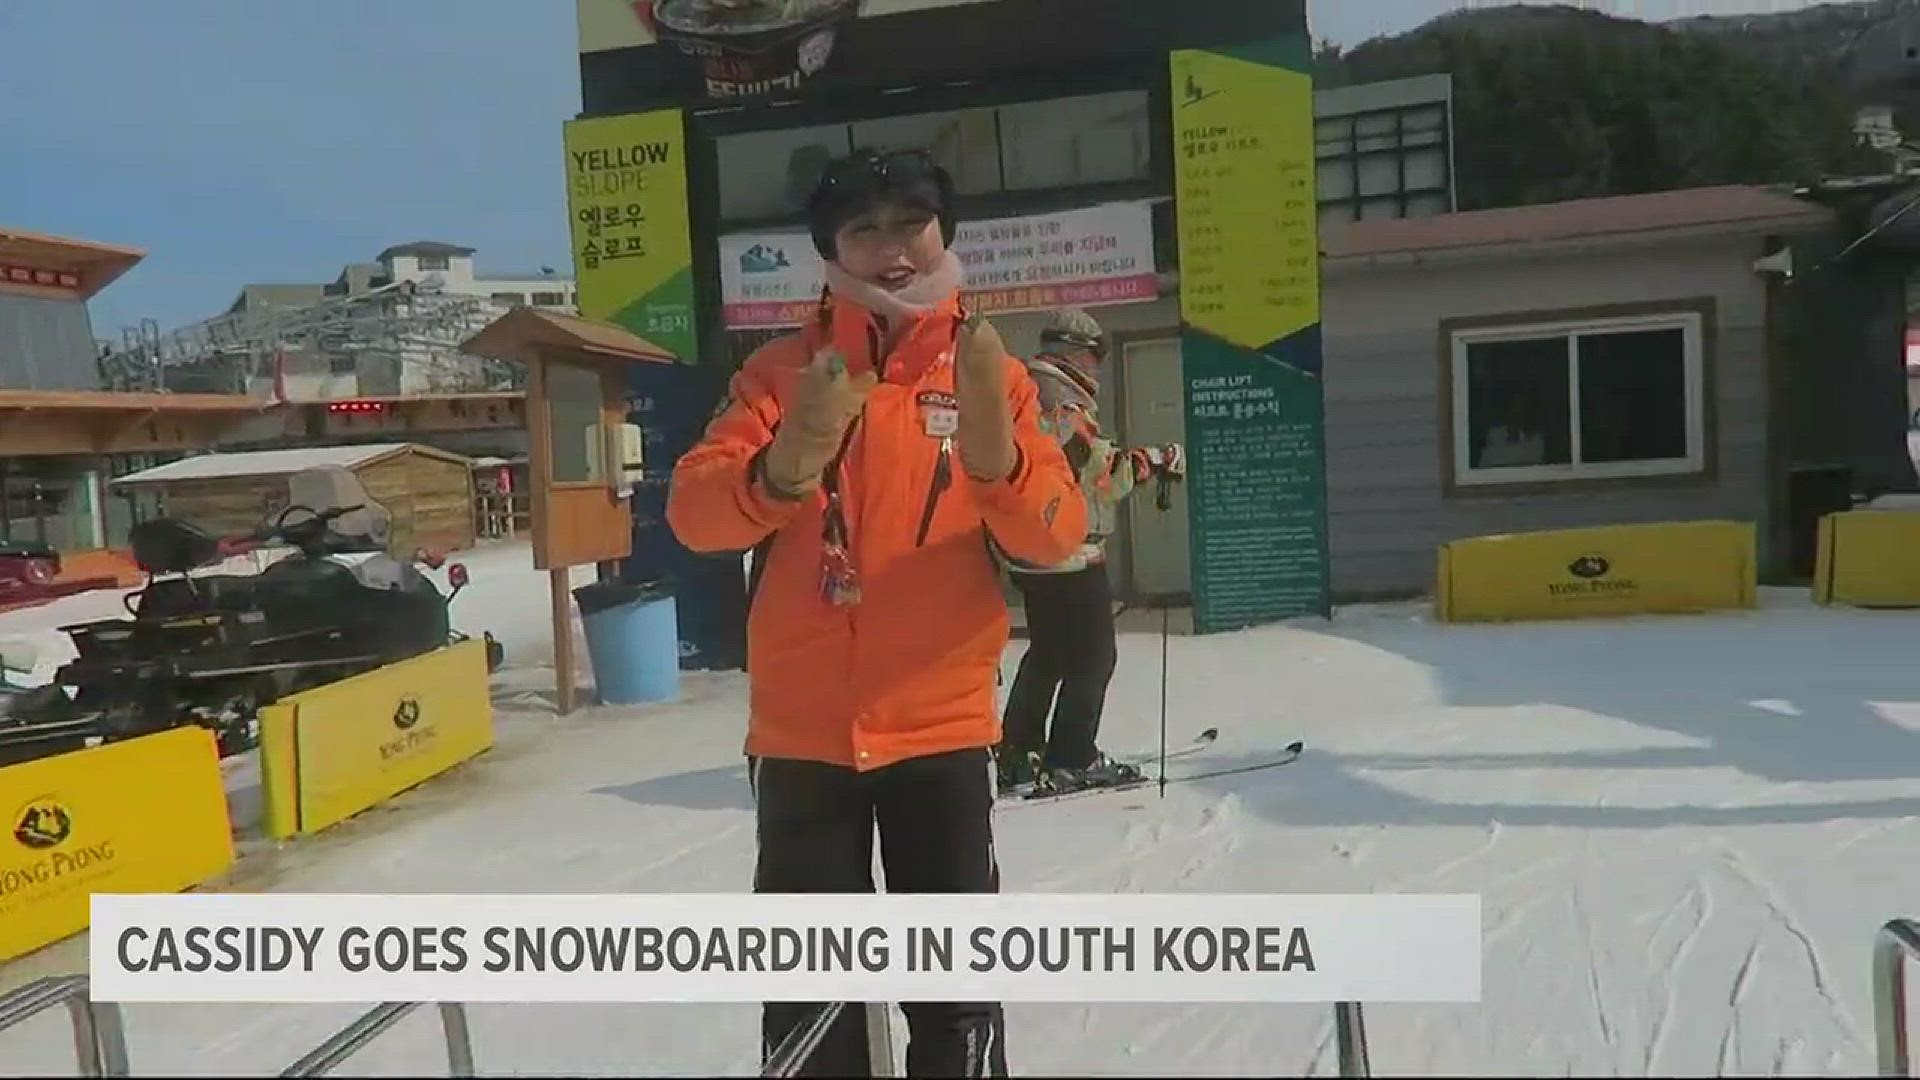 Cassidy Quinn has been working nearly around the clock to cover the PyeongChang Winter Olympics for KGW. She took time out to check out the country's most popular ski resort.